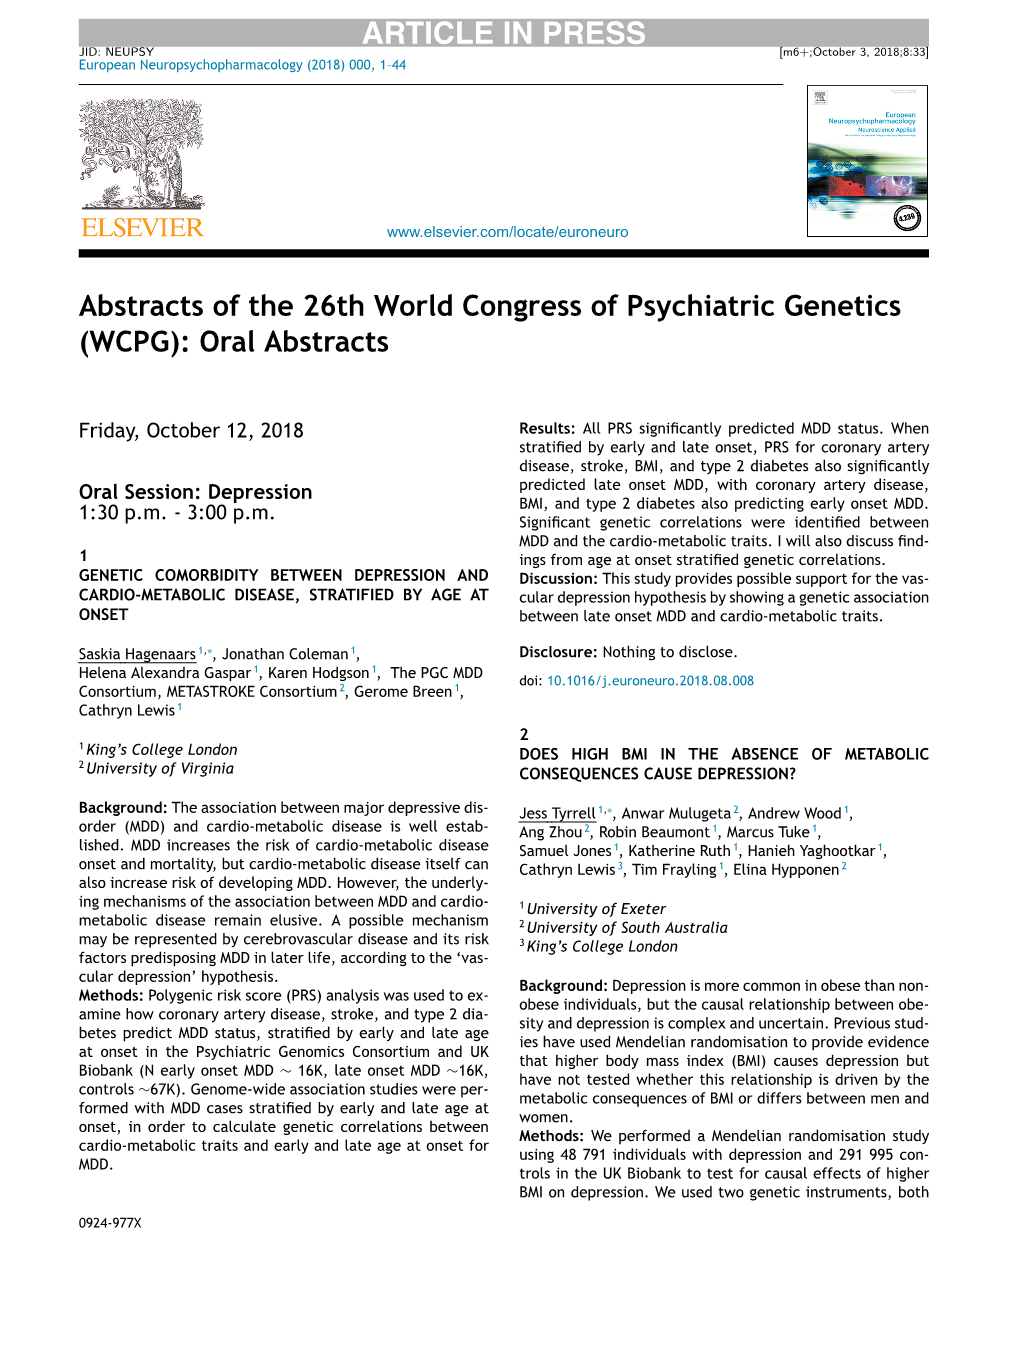 (WCPG): Oral Abstracts